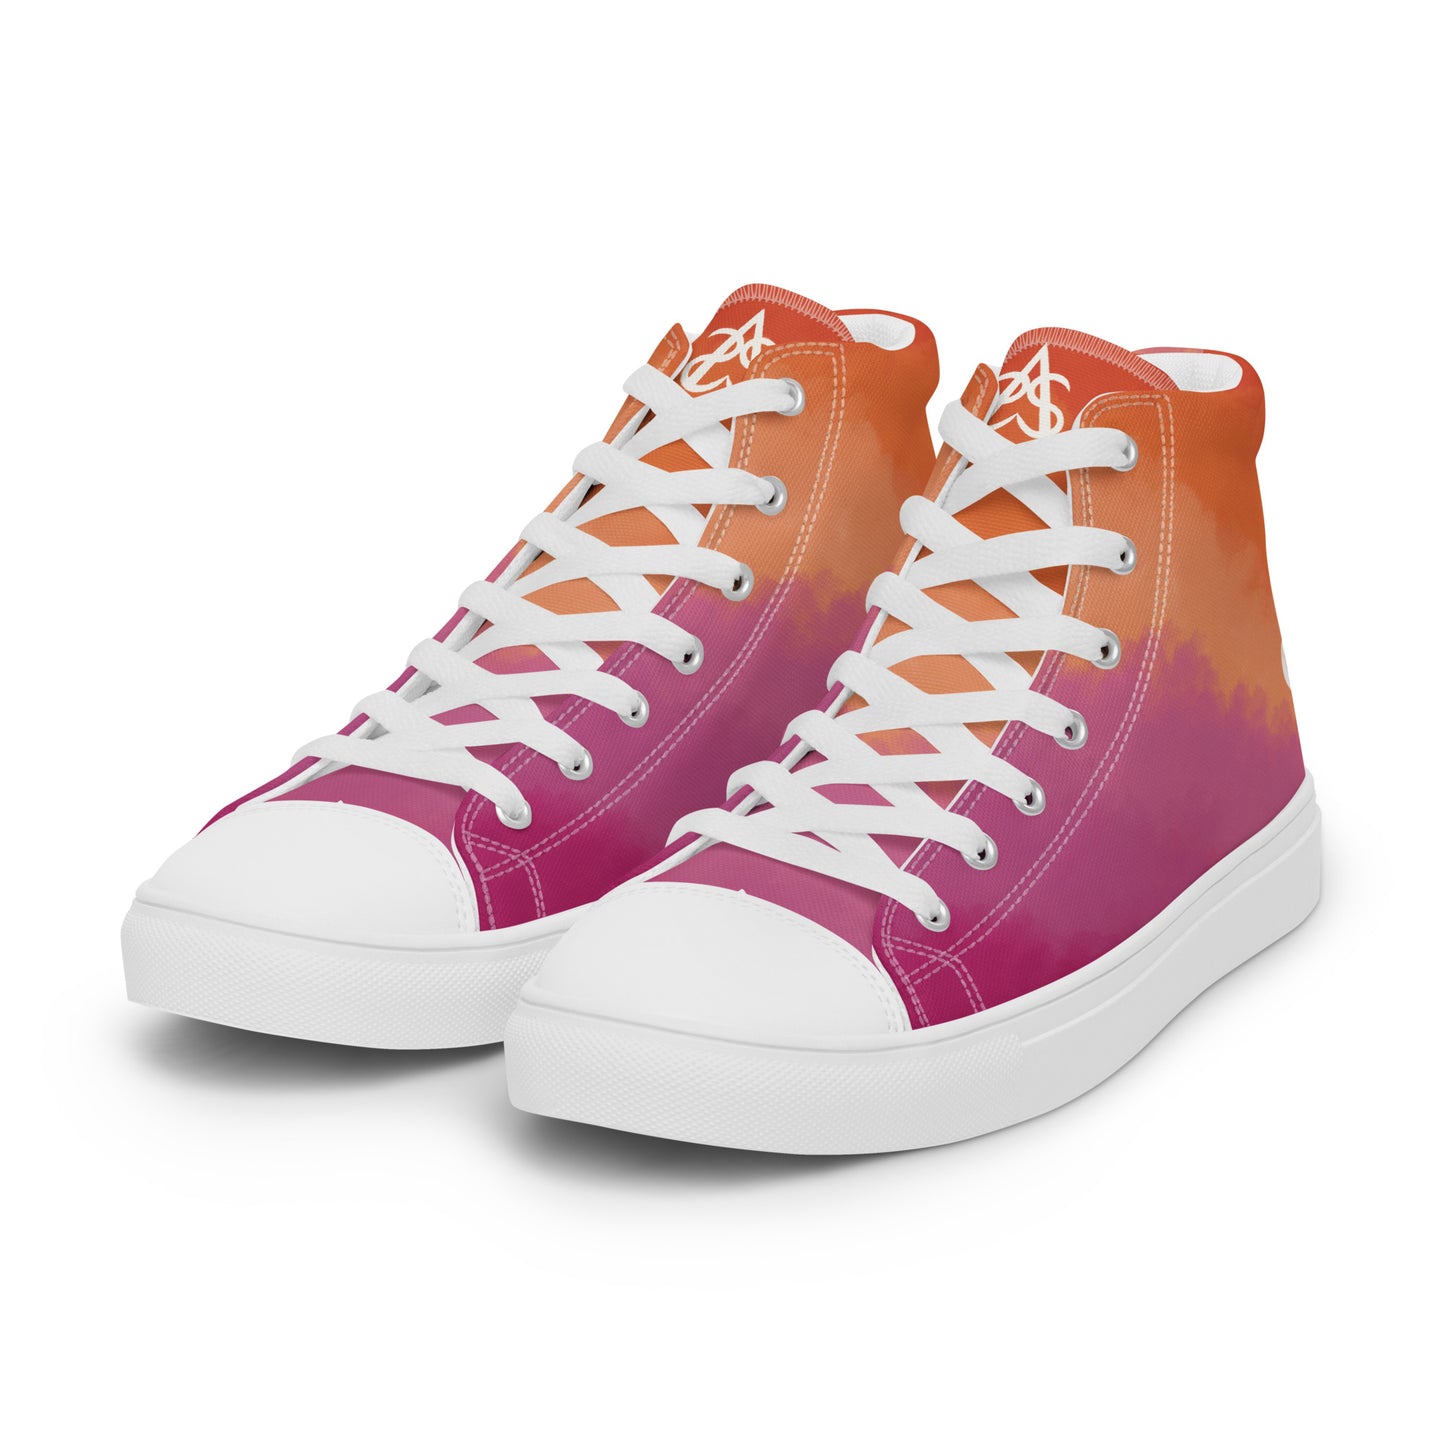 Left front view: A pair of high top shoes with cloud layers in the lesbian flag colors, a white heart on the heel, and the Aras Sivad Studio logo on the tongue.